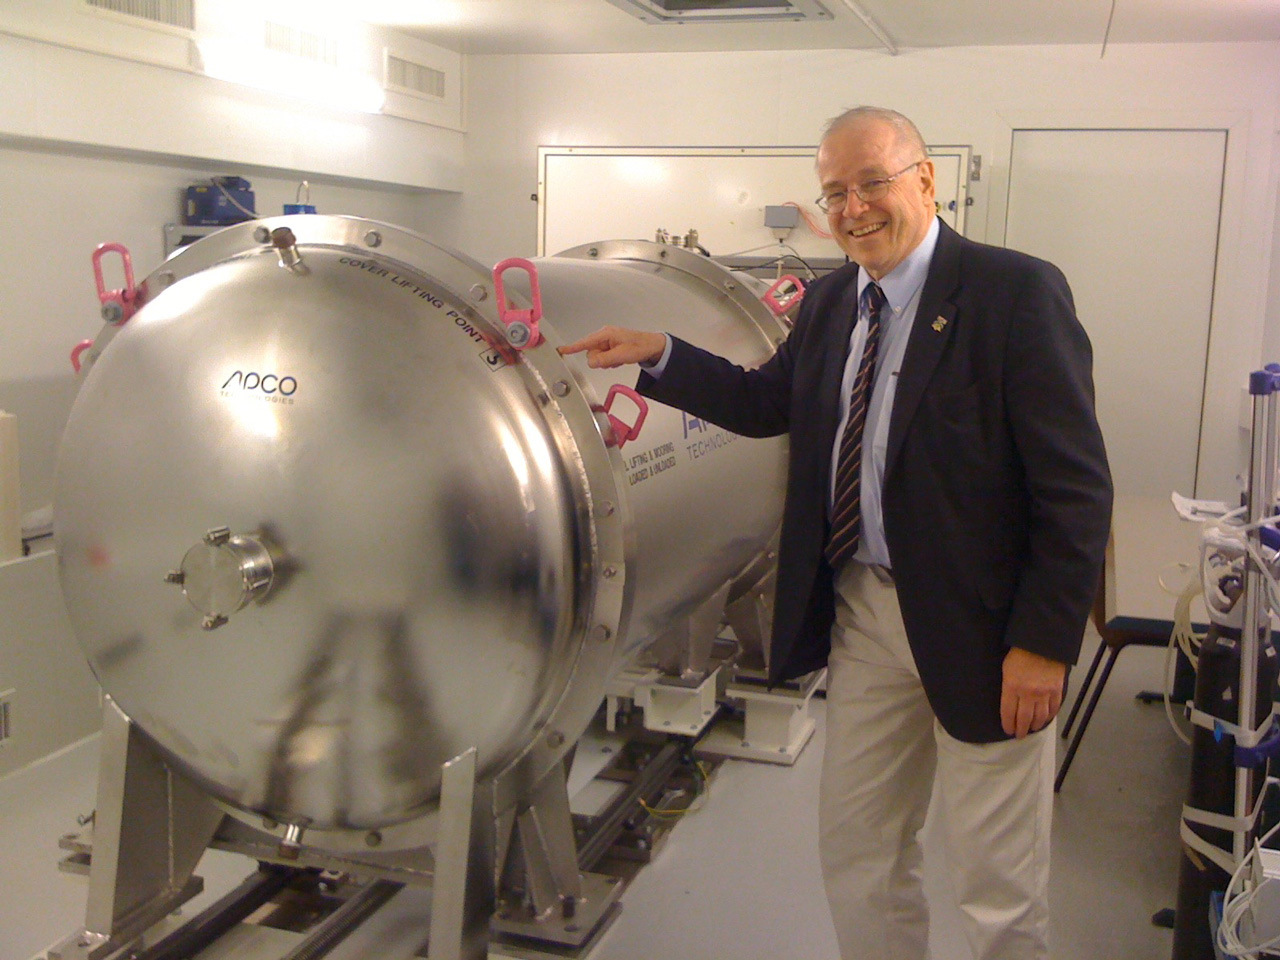 David Latham, a senior astronomer at the Harvard-Smithsonian Center for Astrophysics, with the HARPS-N spectrograph, which measures the masses of exoplanets.